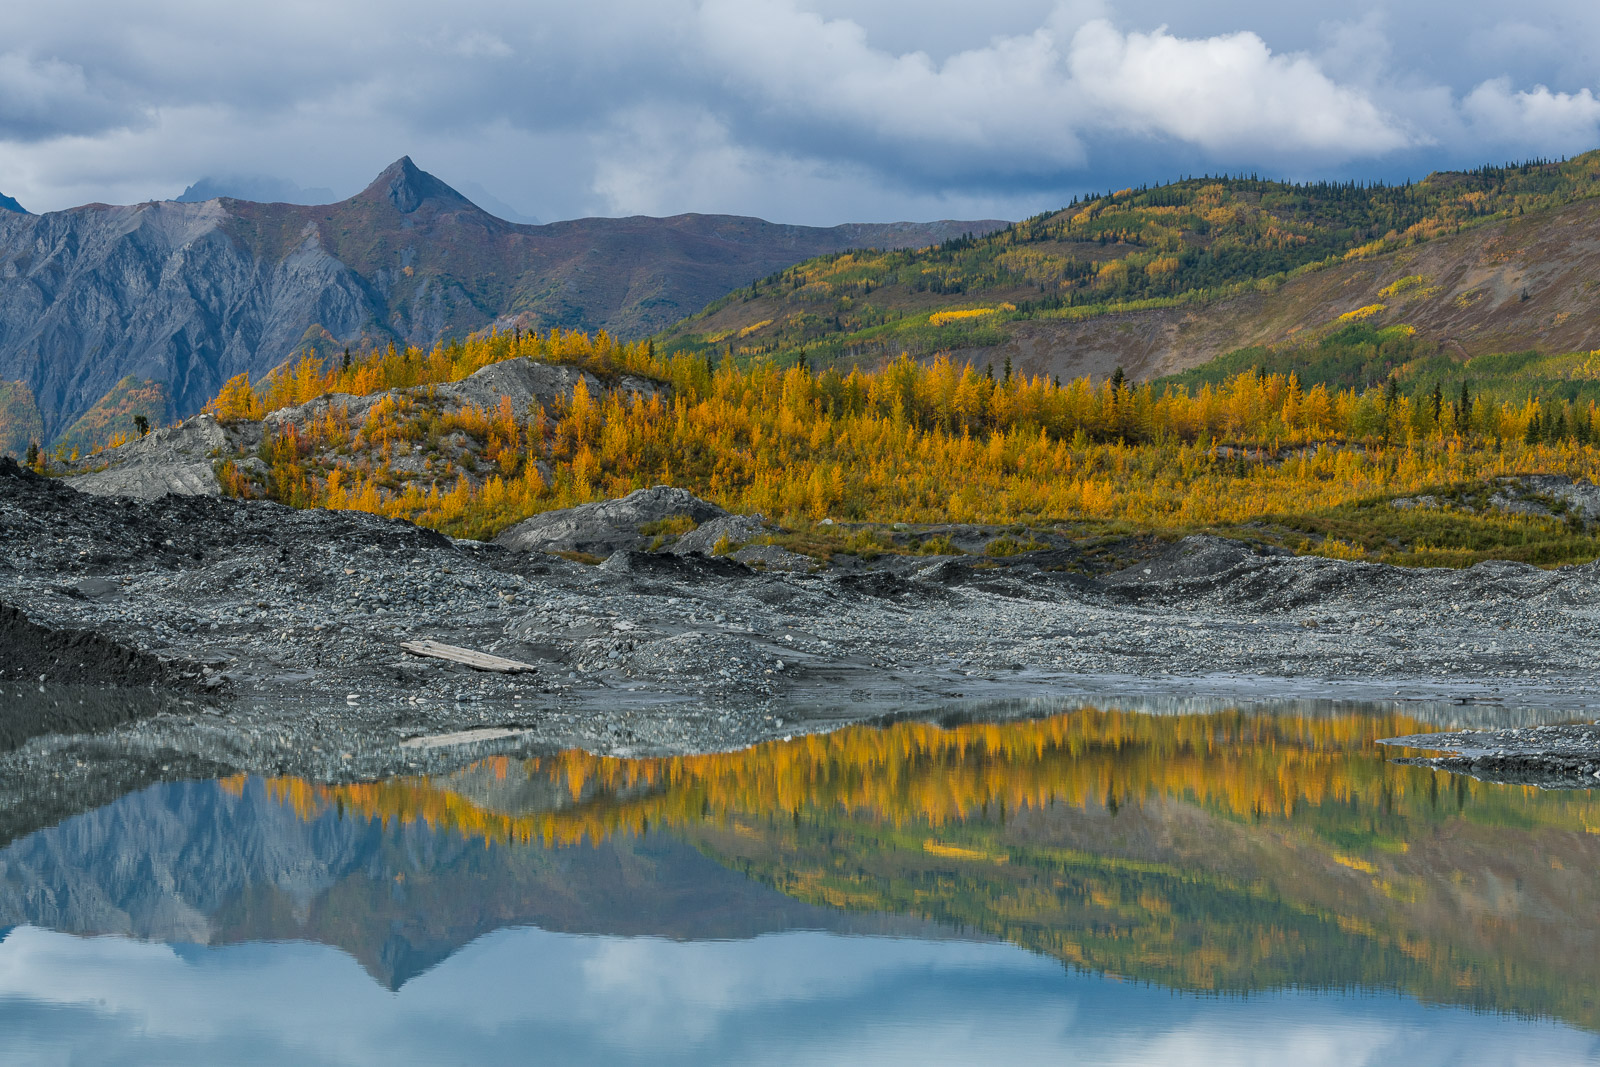 A pool in the moraine of Matanuska Glacier reflects mouhntains and autumn colors.